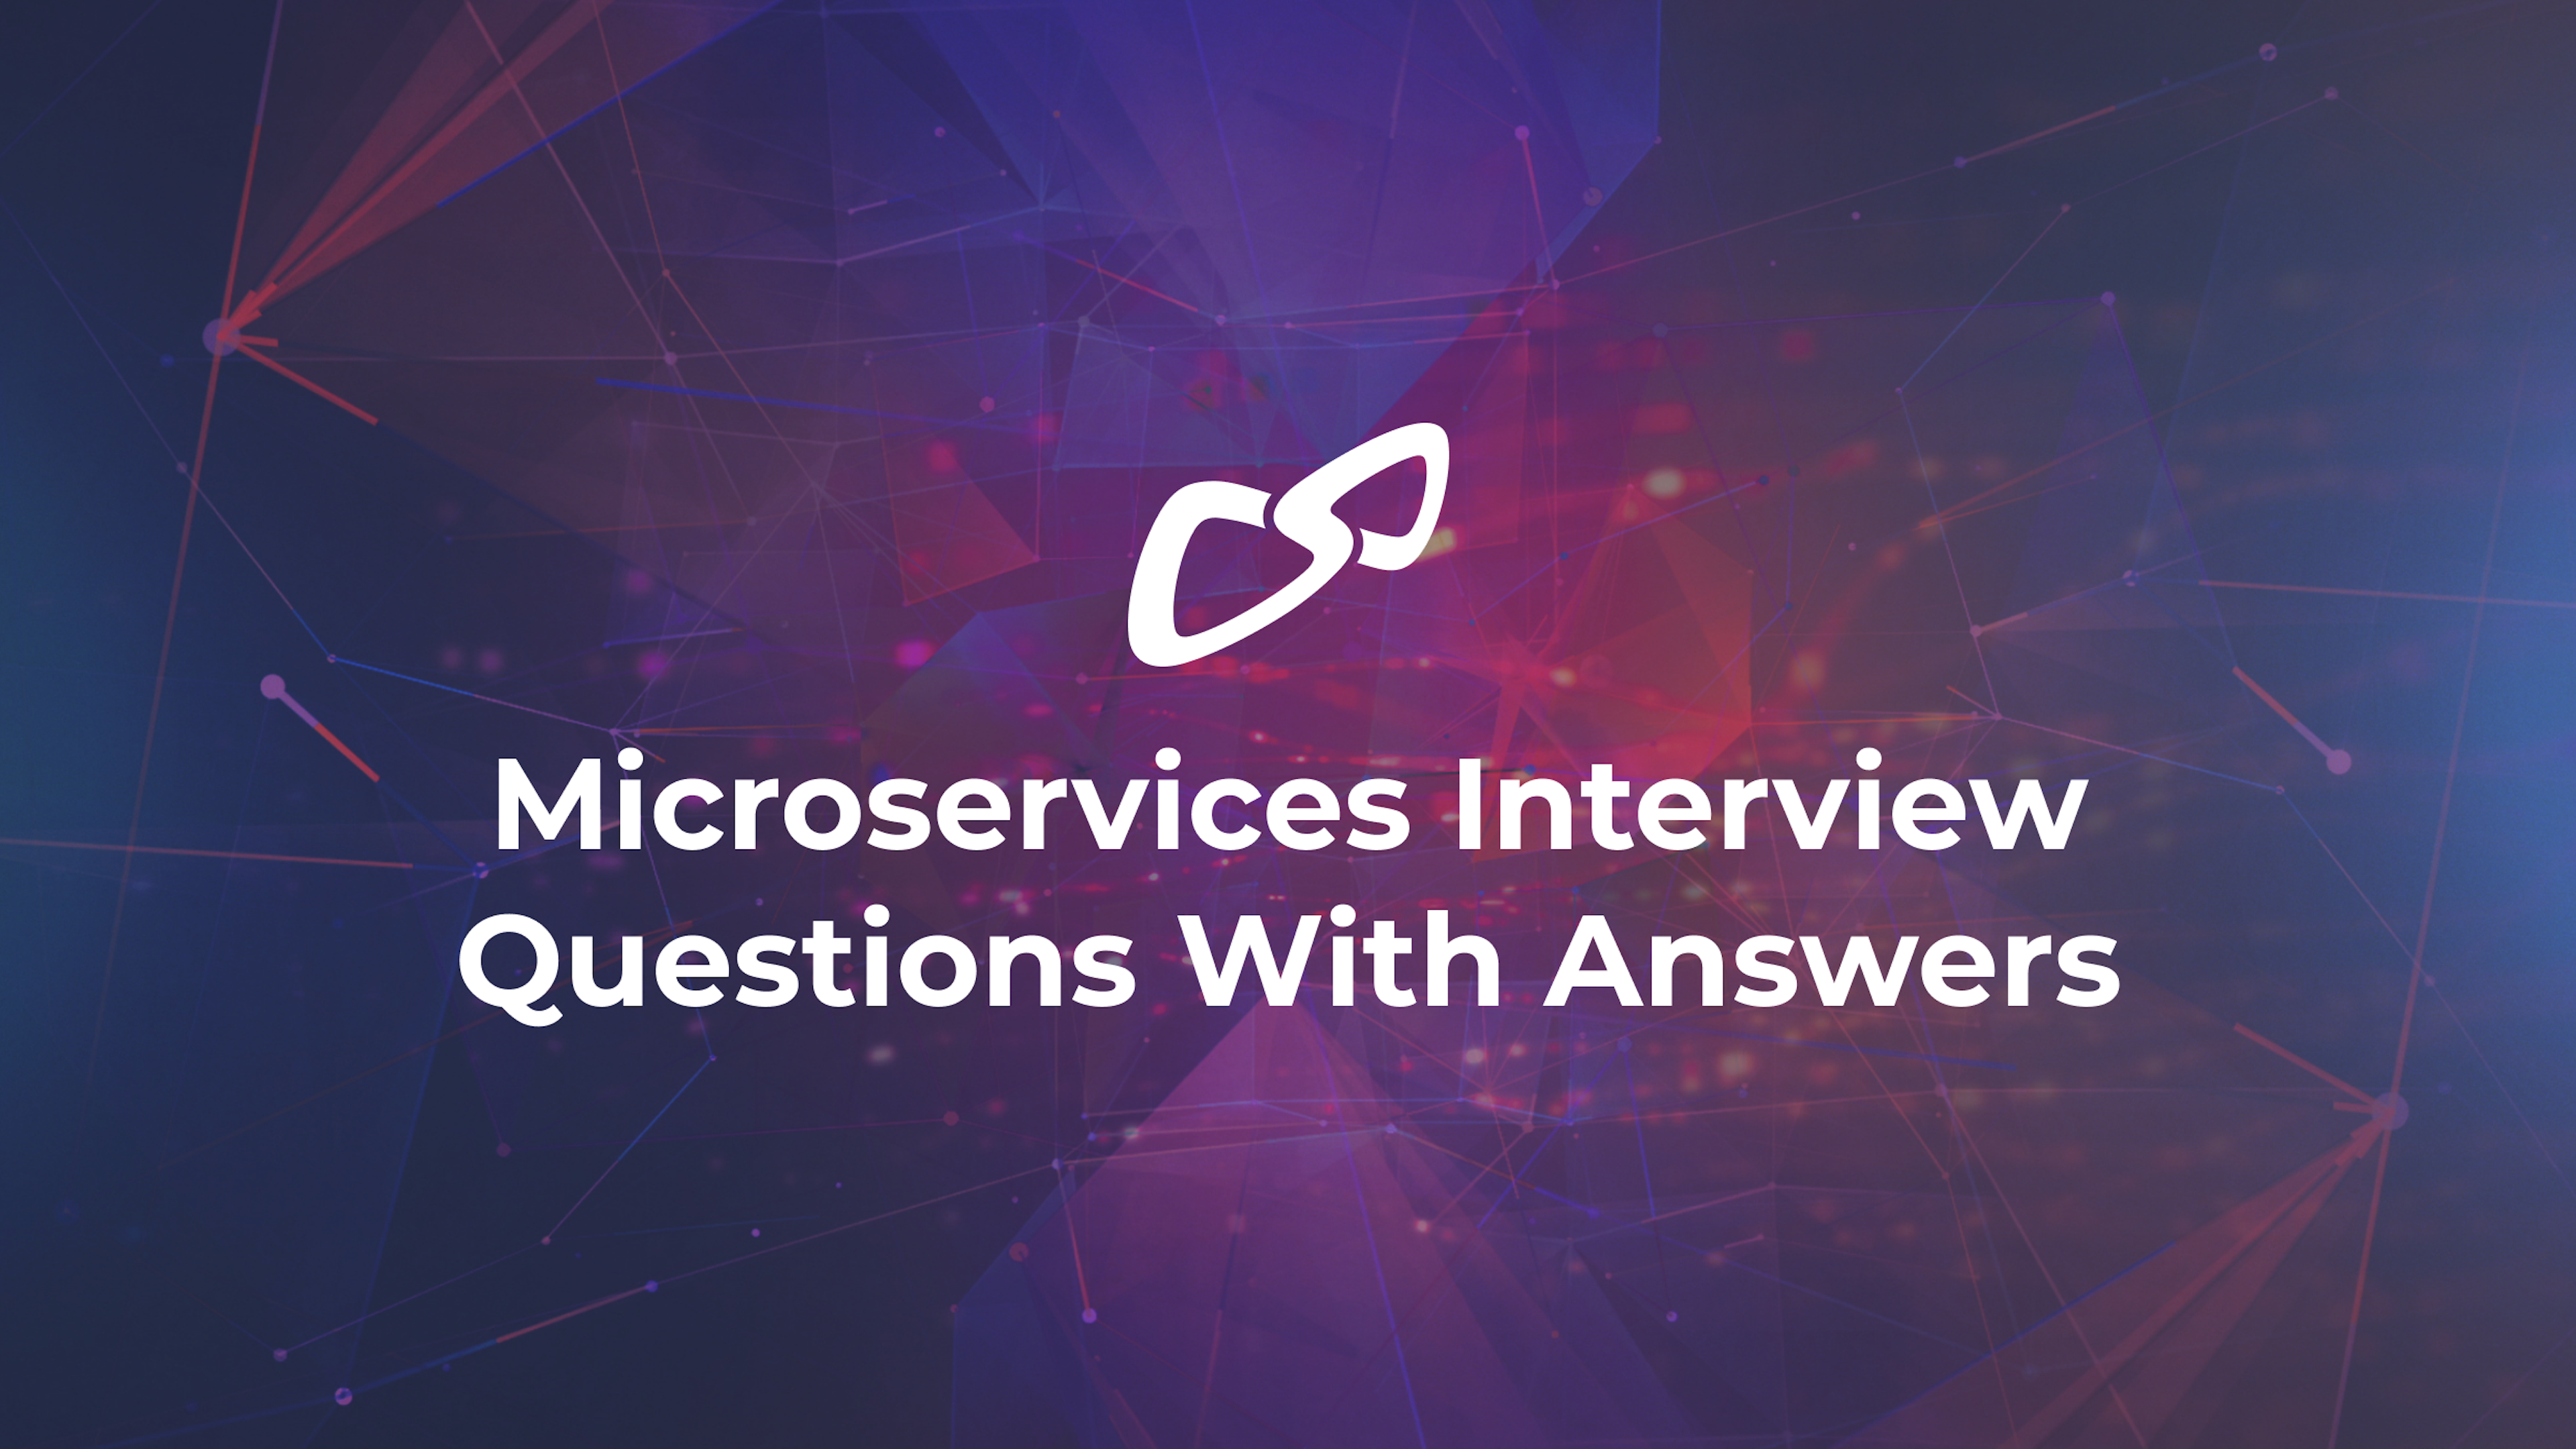 Microservices Interview Questions With Answers